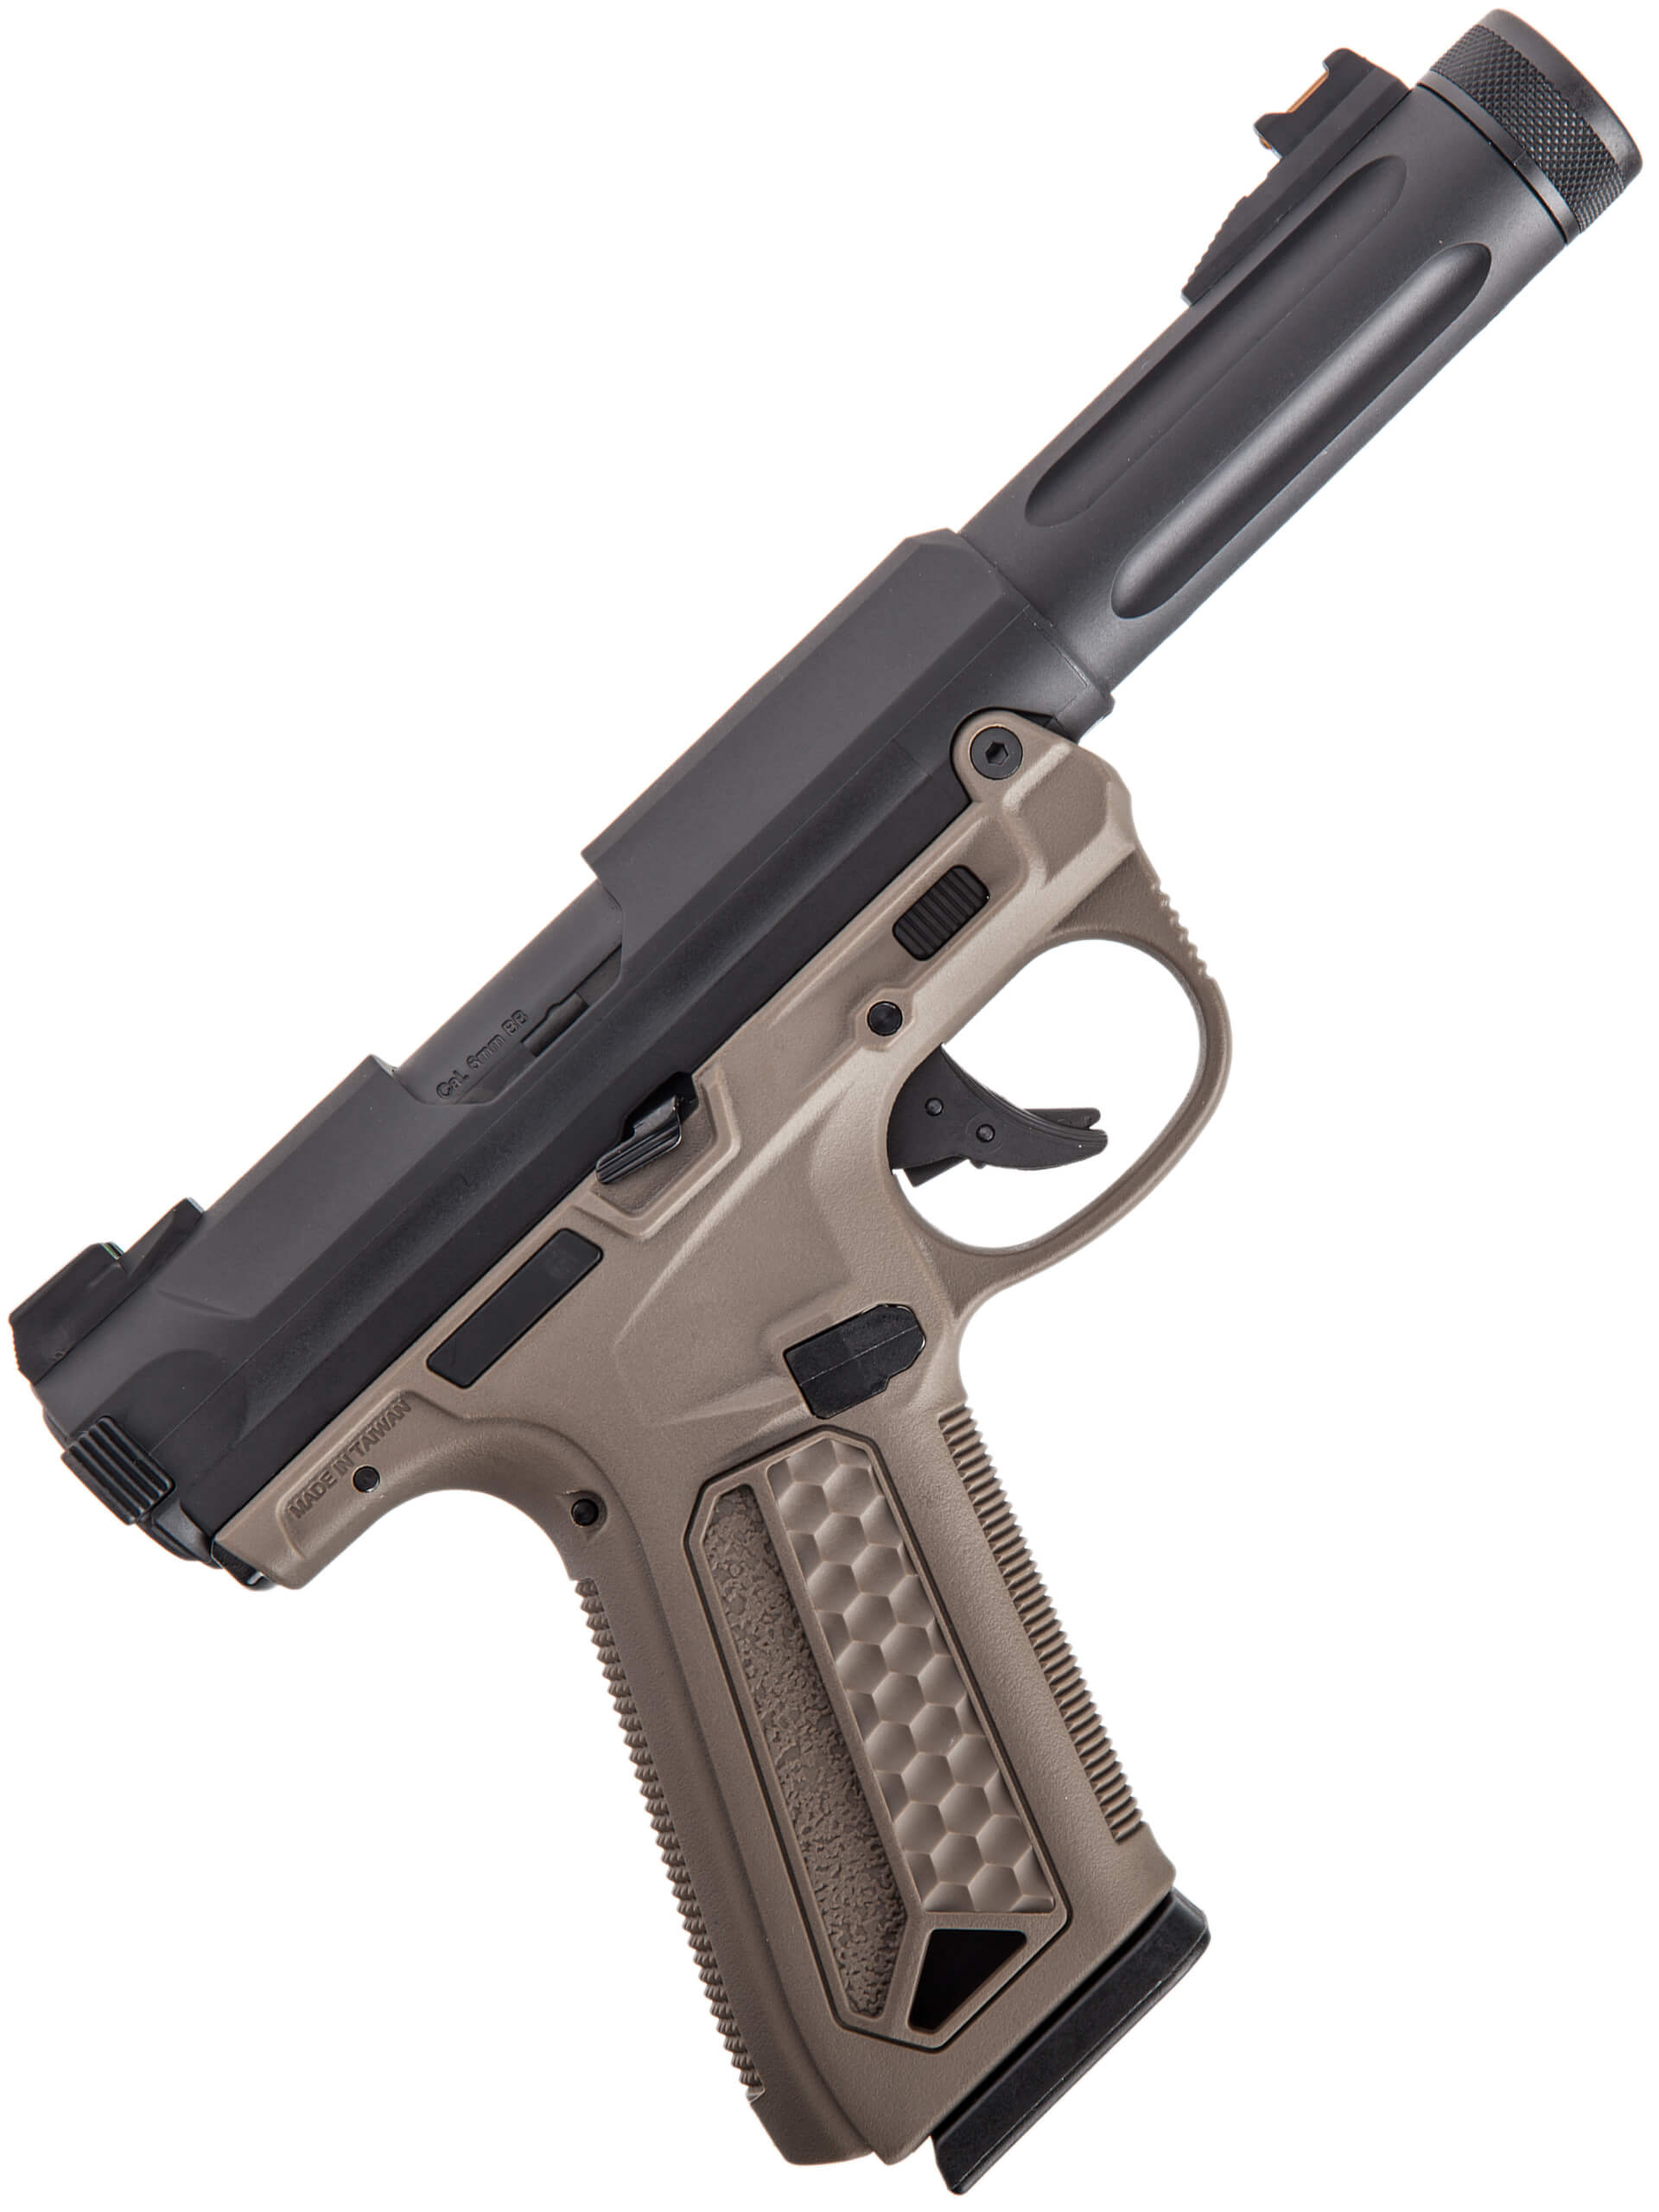 Action Army AAP-01 Gas Pistol in Dual Tone Black/Tan